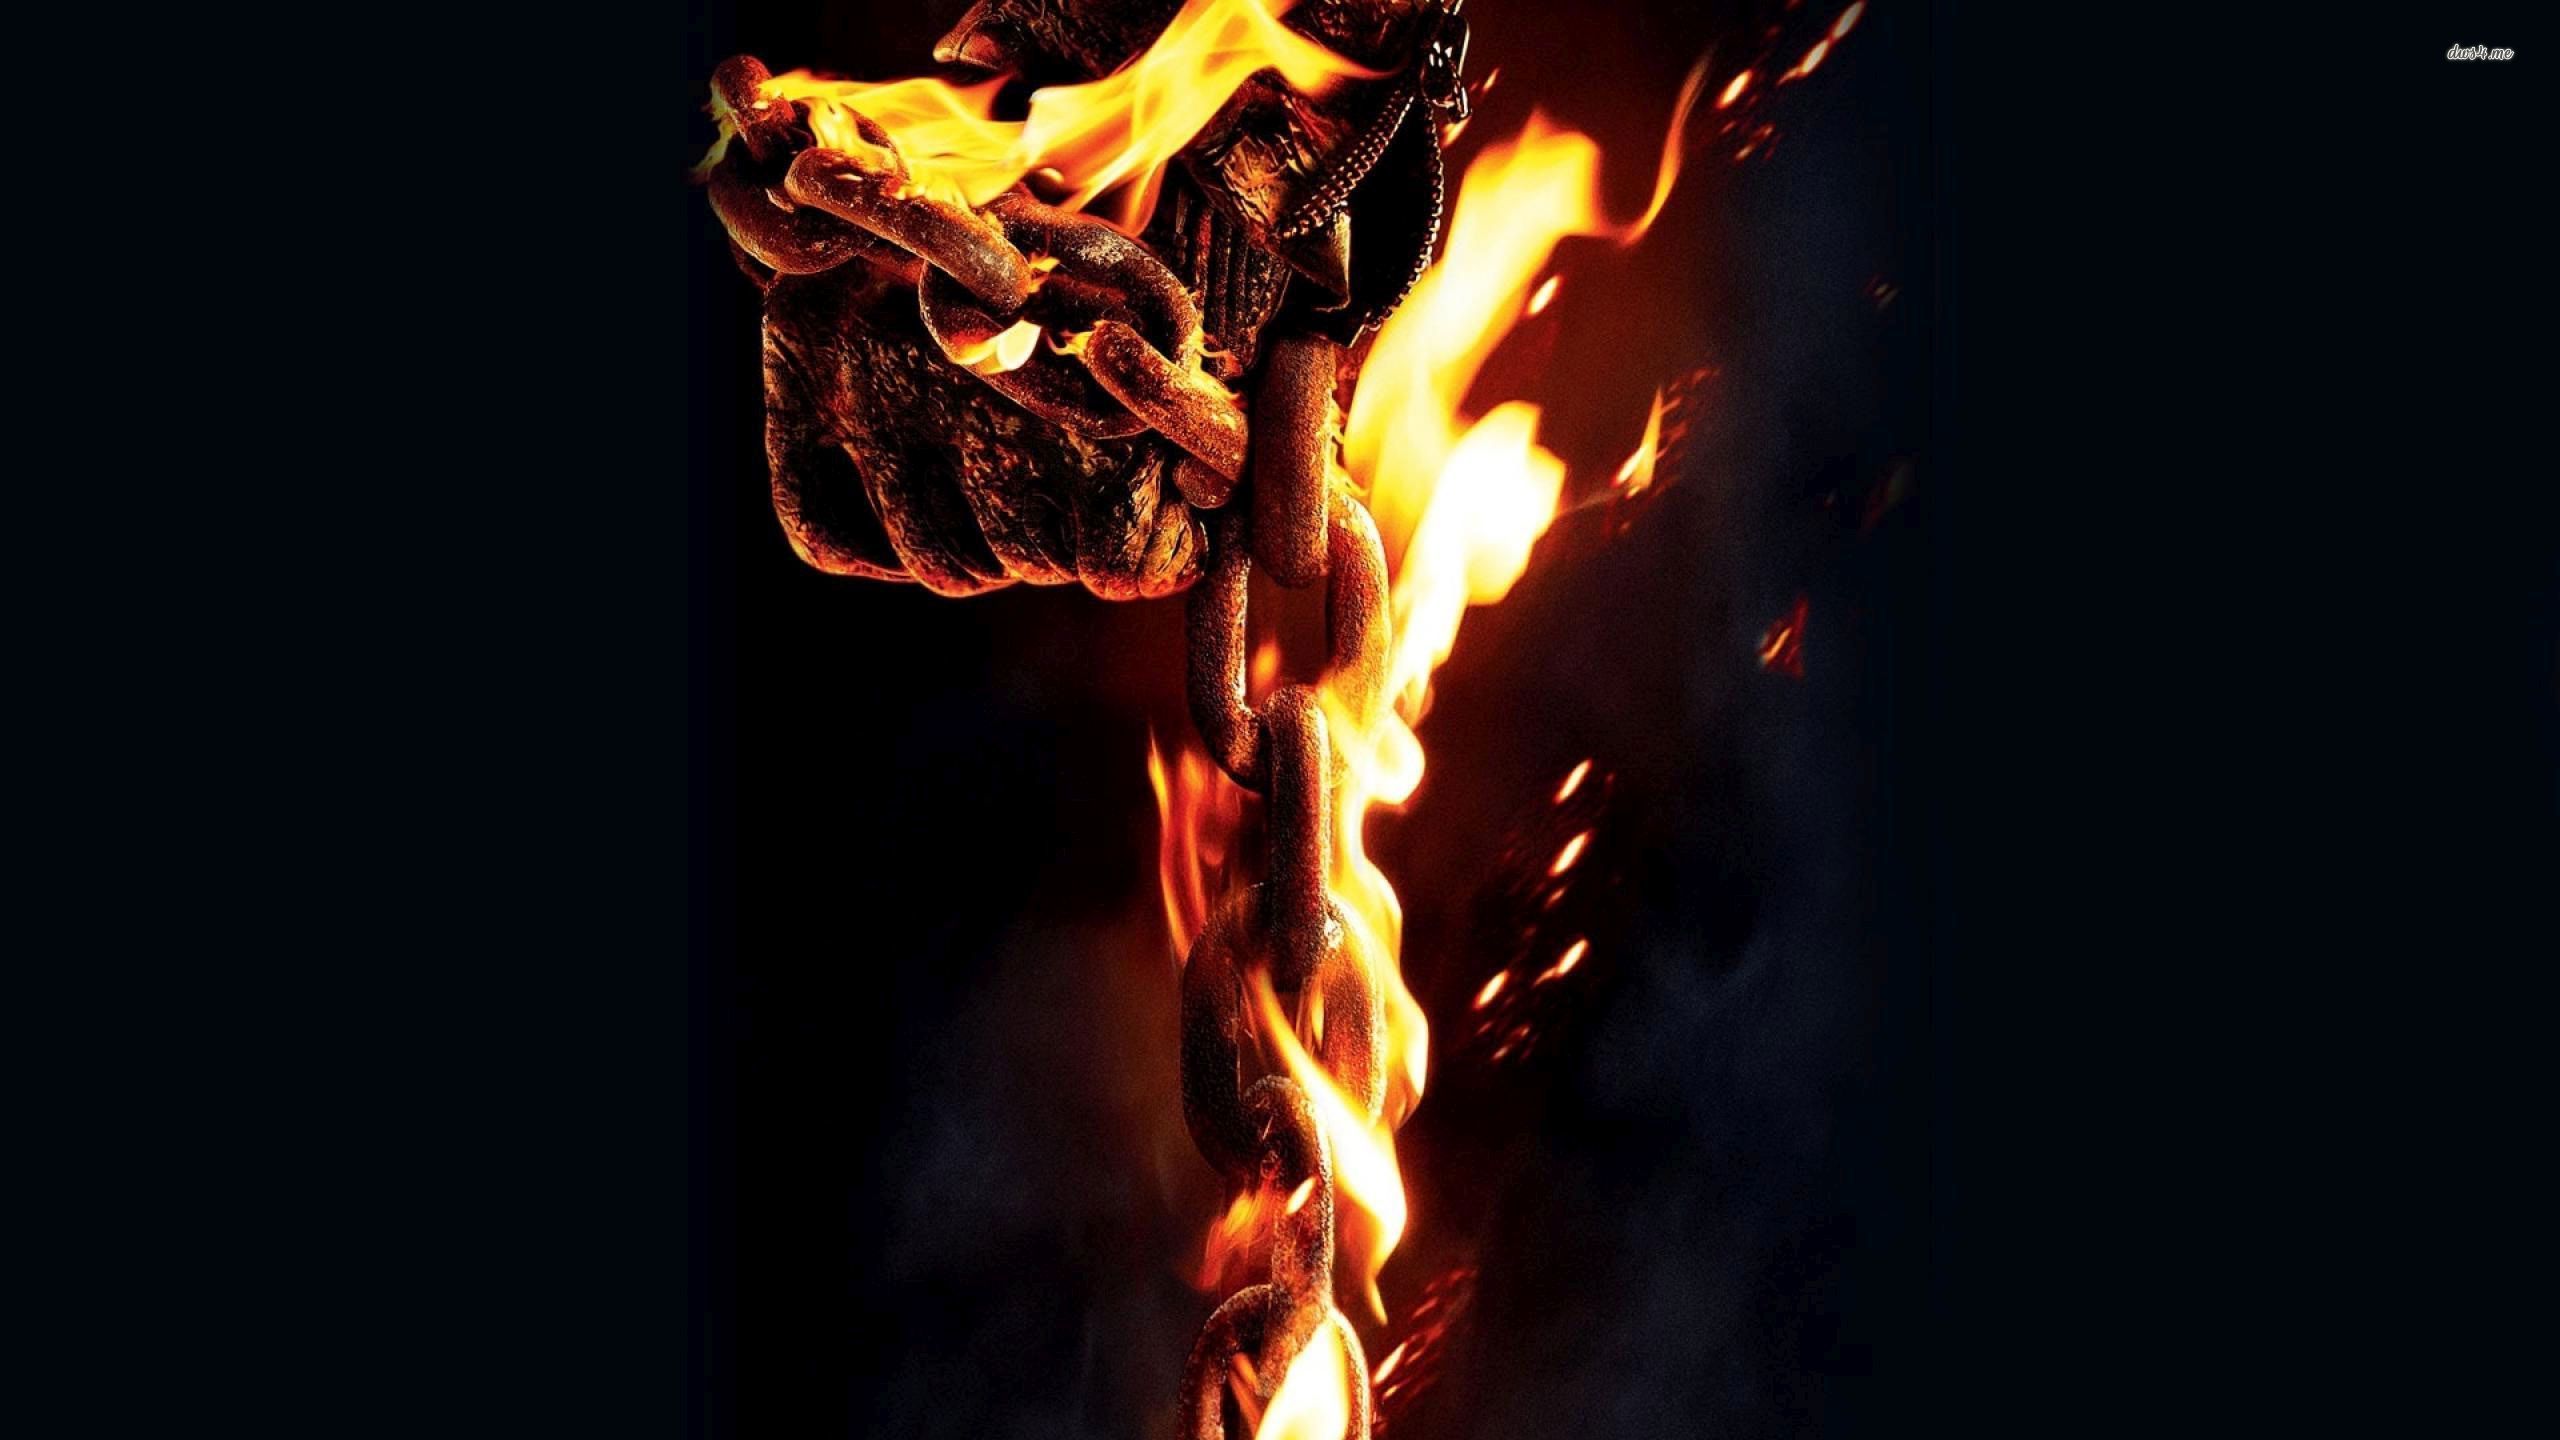 Ghost Rider wallpaper - Movie wallpapers - #29170